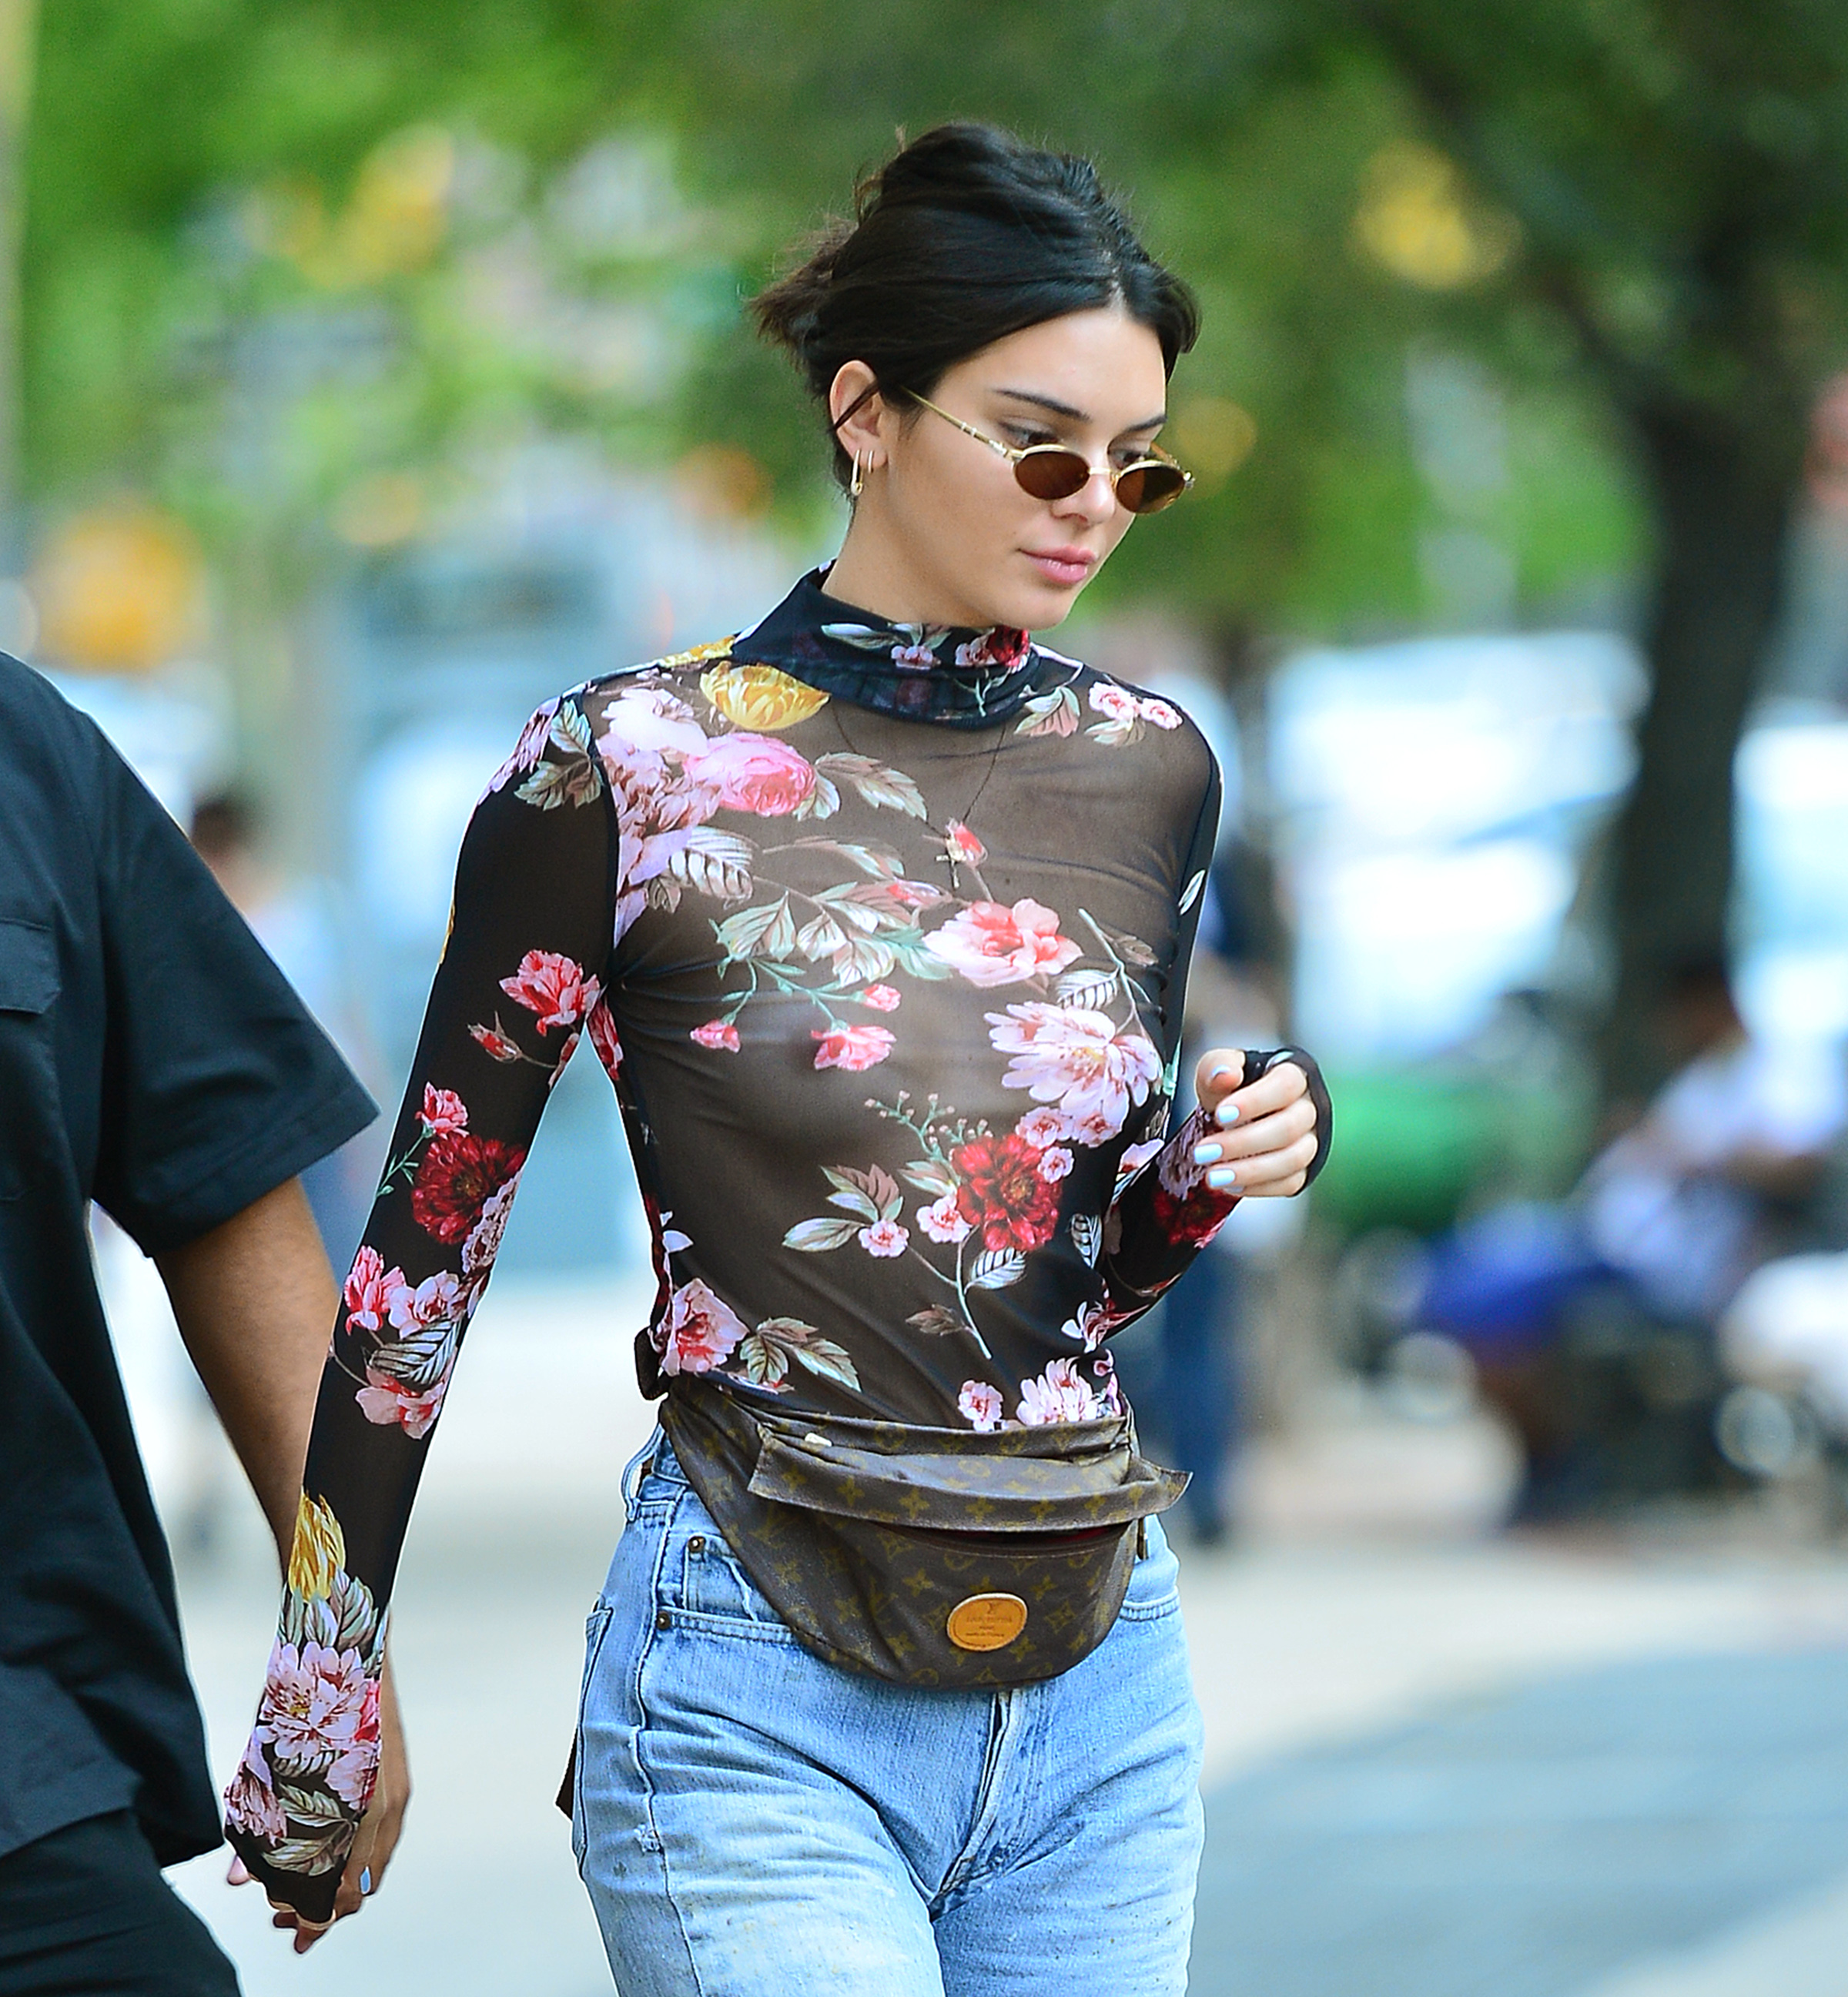 Kendall Jenner looks striking in a see through floral mesh top and daisy du...